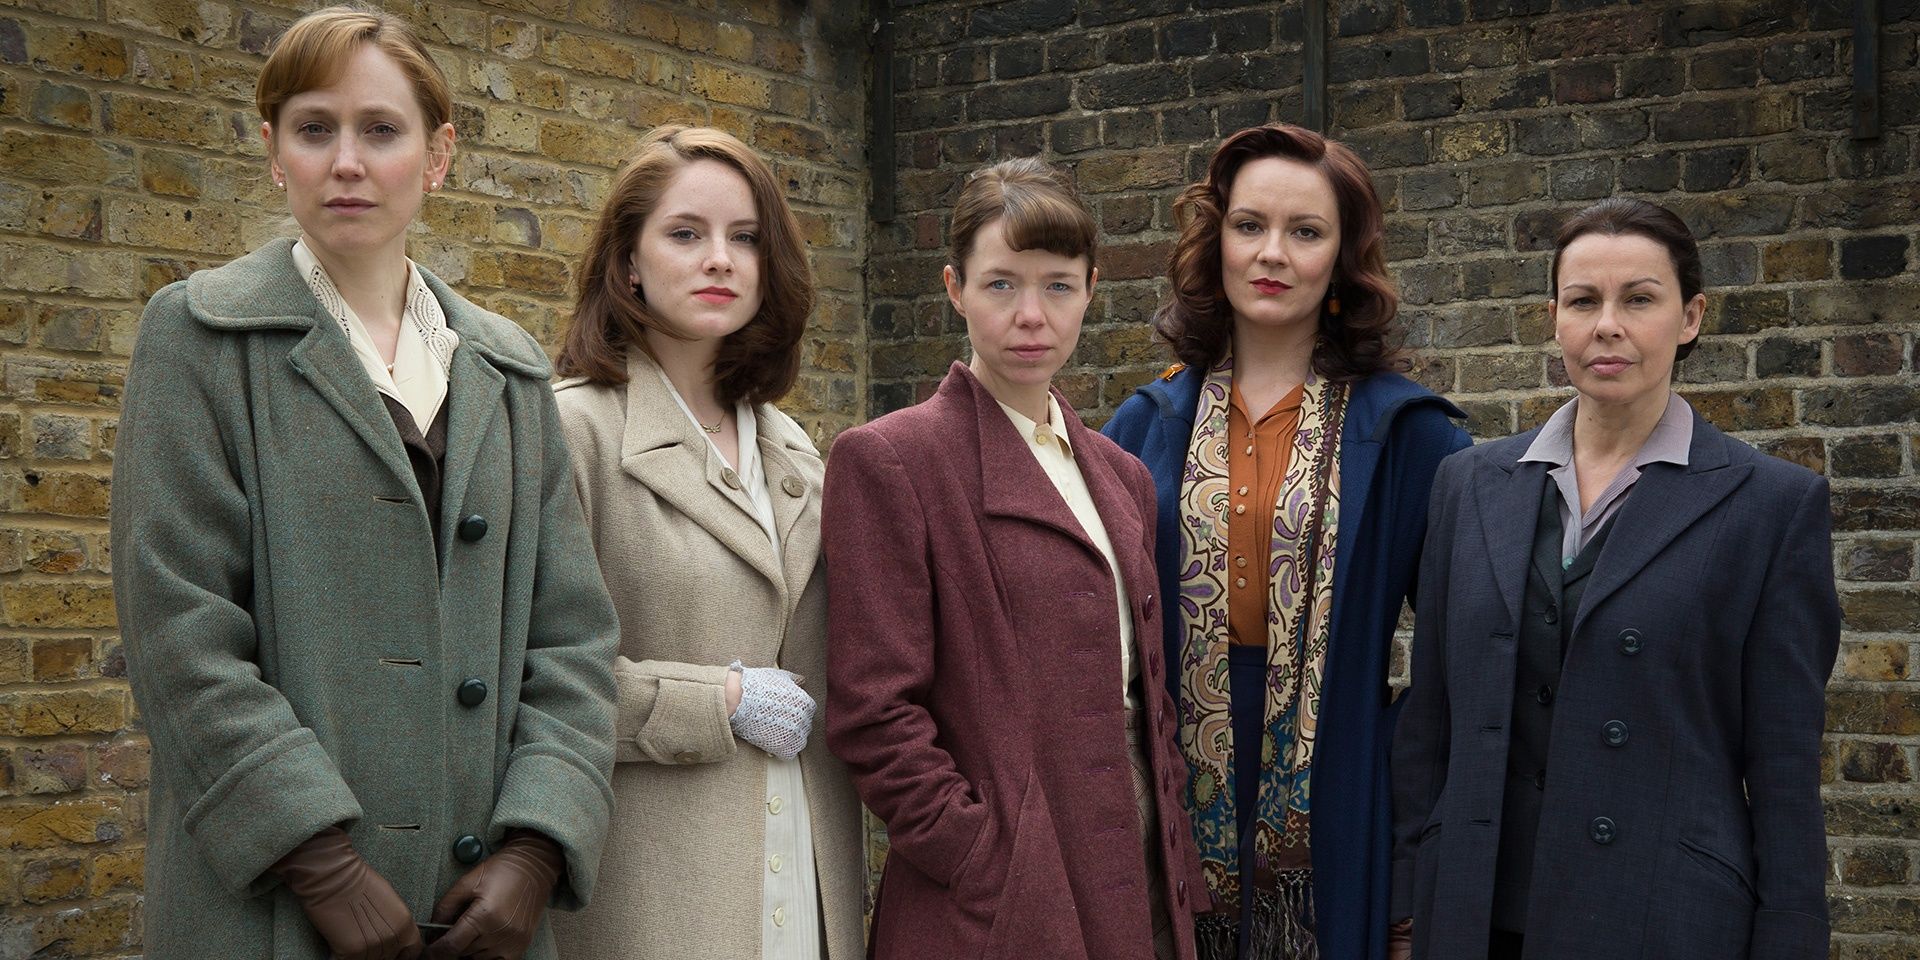 The women of Bletchley Circle against a brick wall